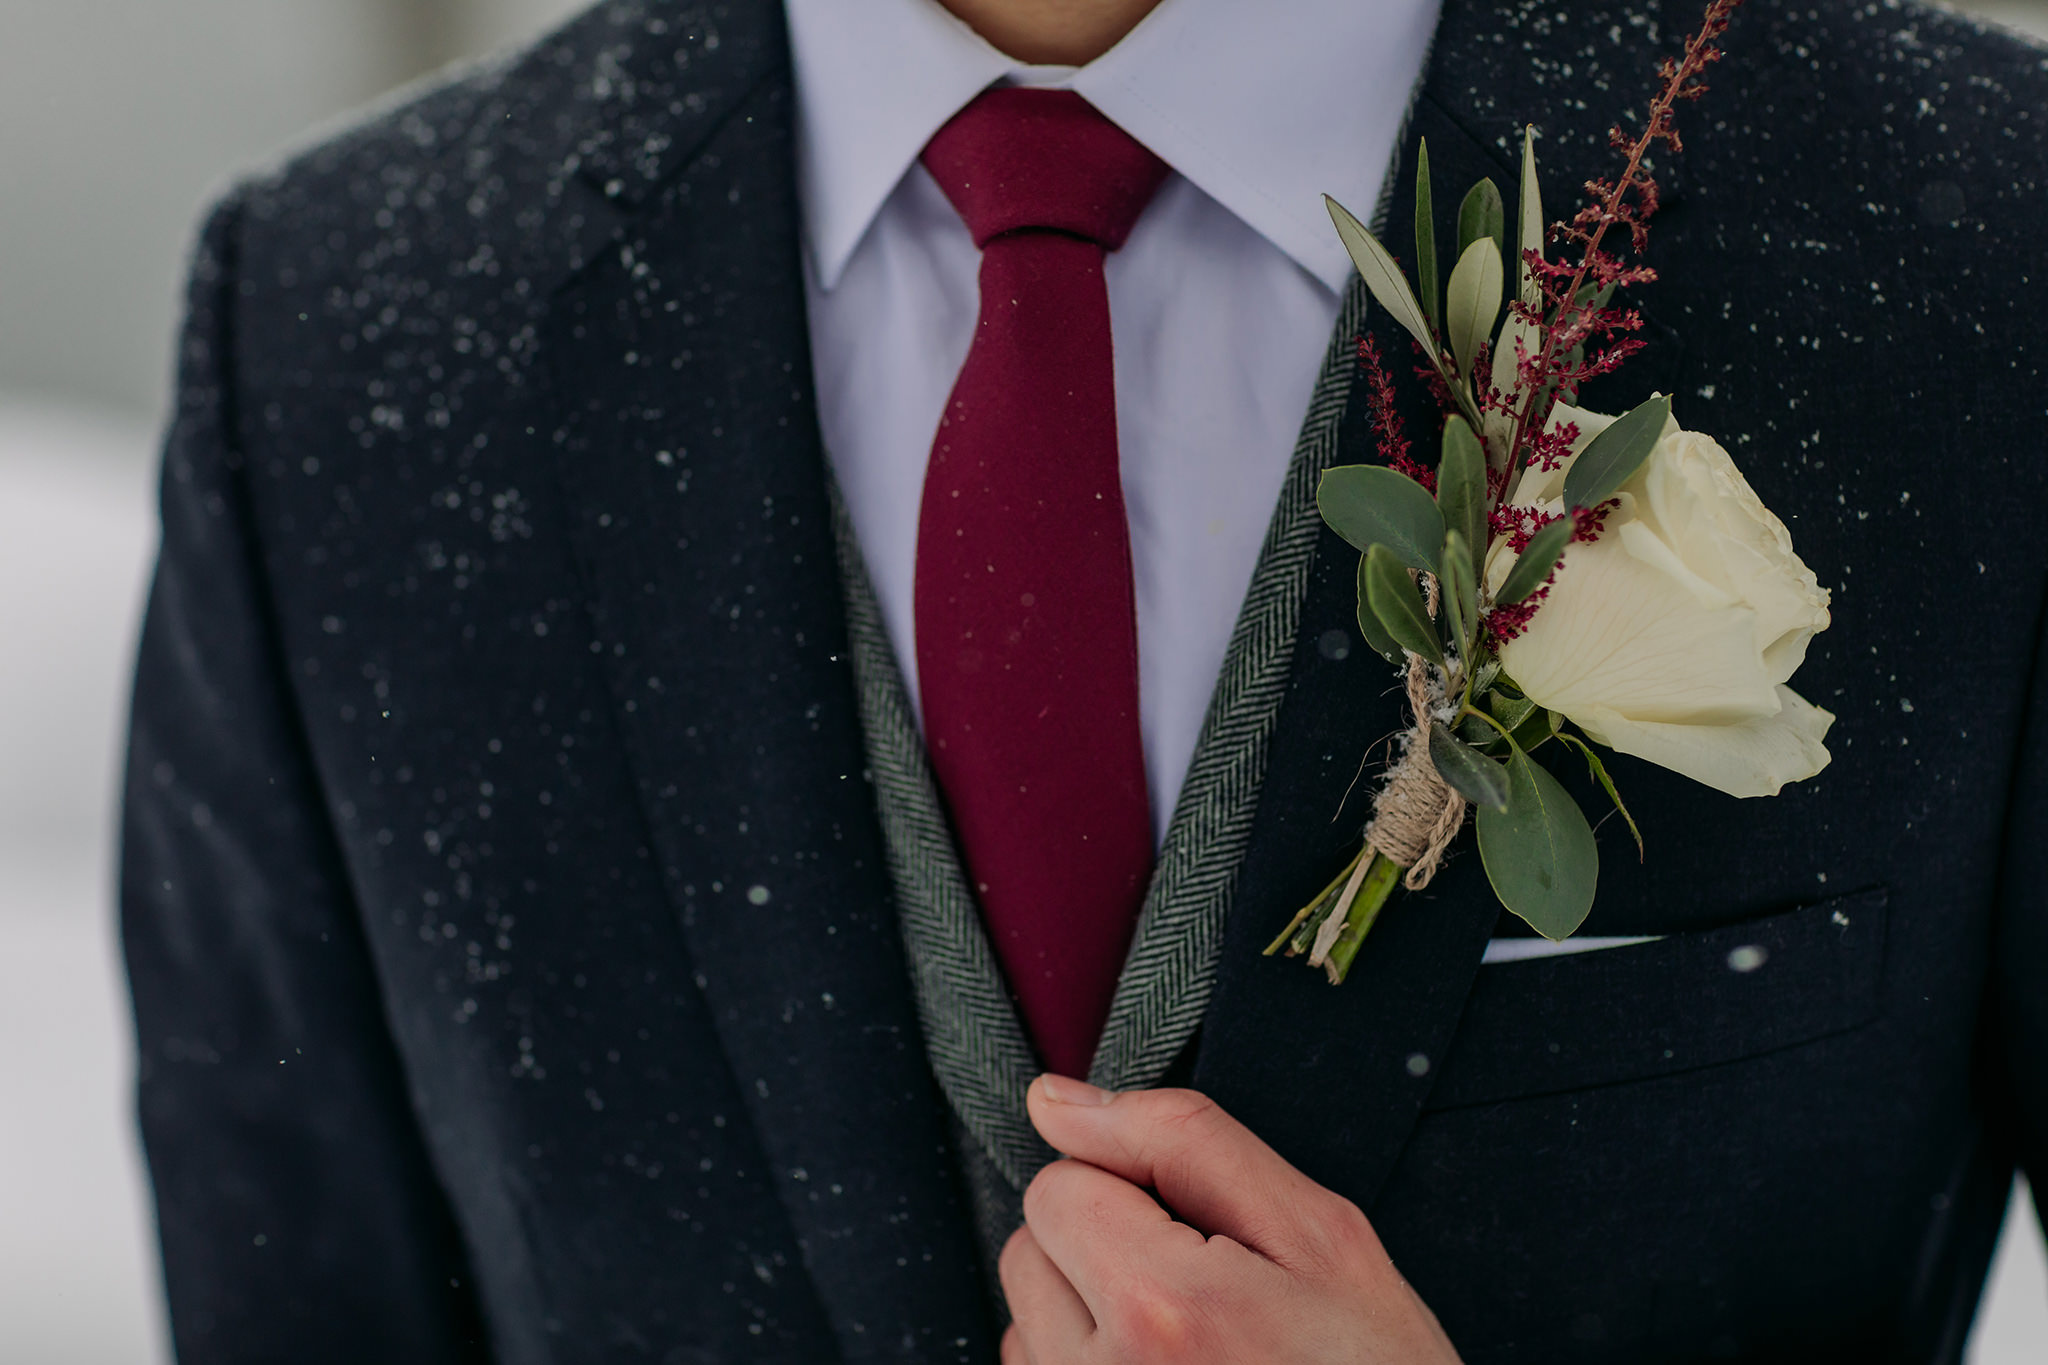 Wedding portraits at Emerald Lake Lodge in Yoho National Park. Mountain wedding in a winter wonderland. Groom boutonniere for winter wedding.